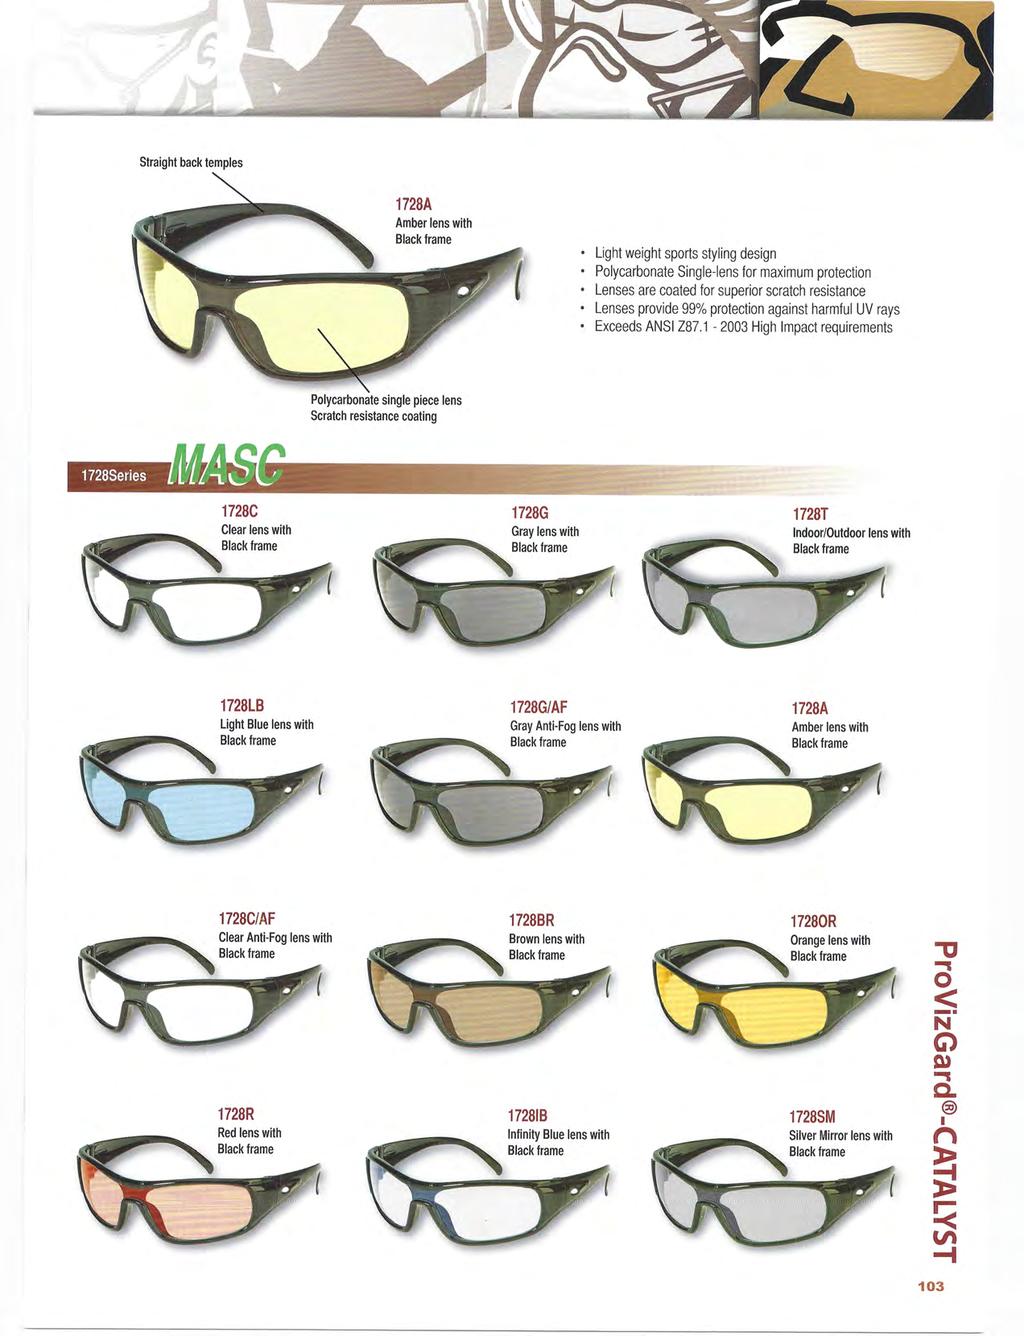 Straight back temples 1728A Amber lens with Black frame Light weight sports styling design Polycarbonate Single-lens for maximum protection Lenses are coated for superior scratch resistance Lenses